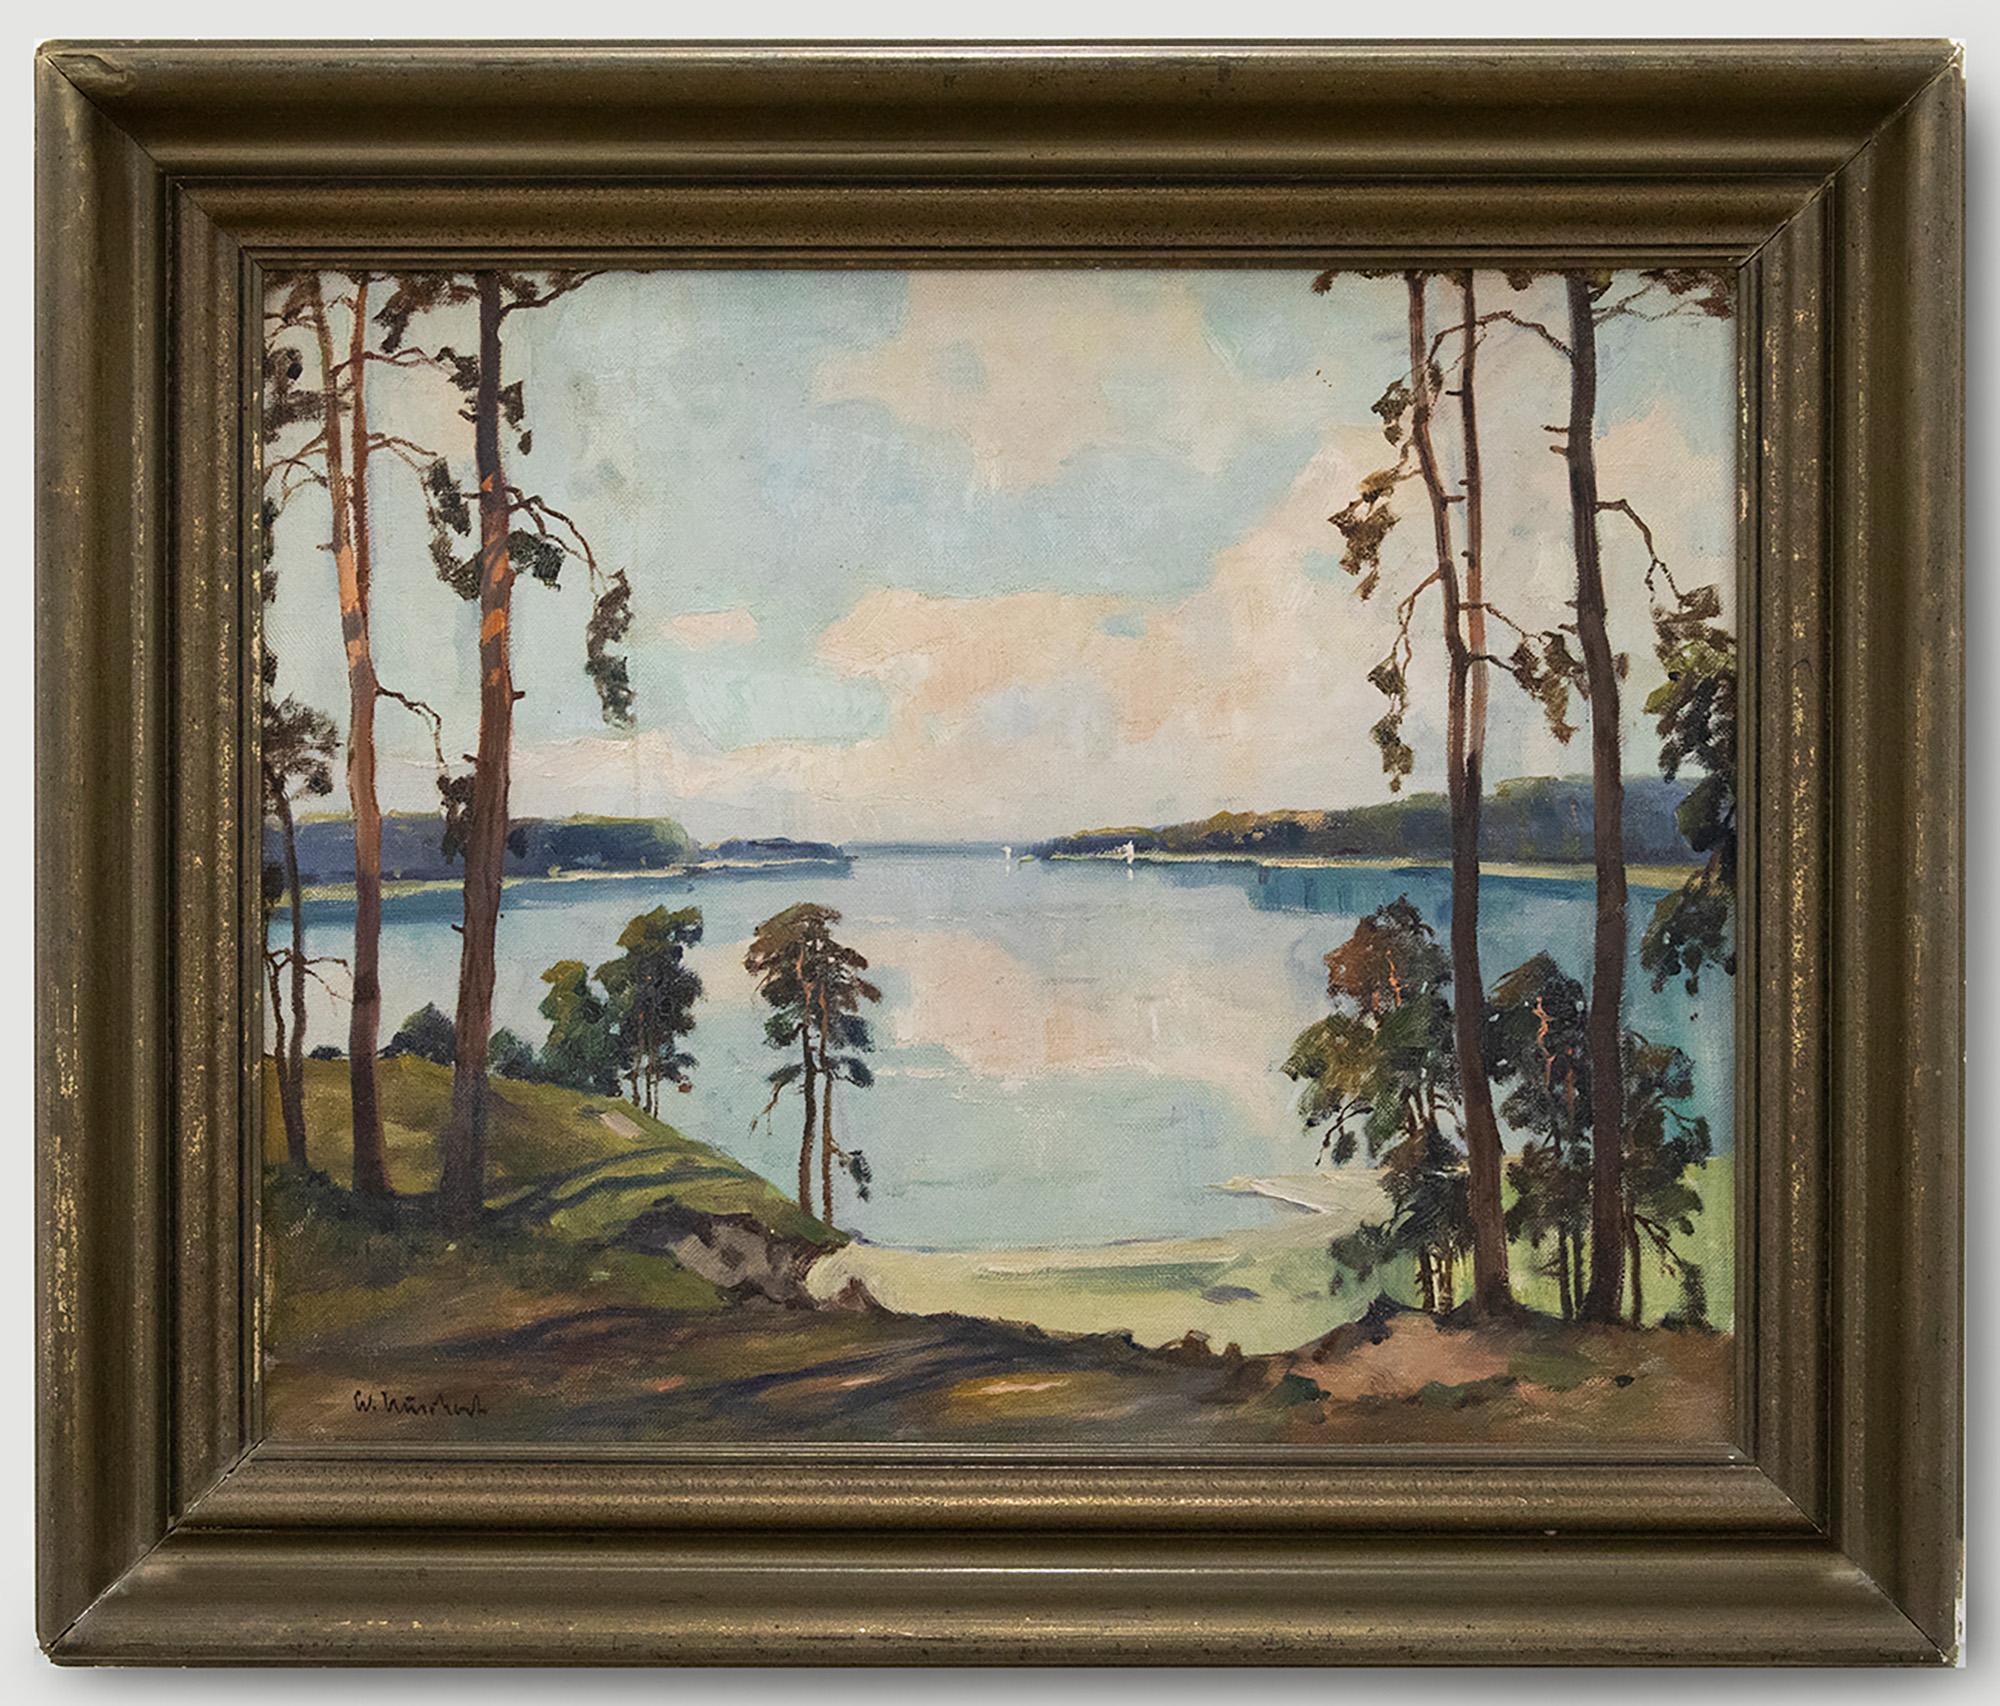 A charming depiction of a lakeside landscape, framed by tall pine trees on either side. The artist has painted the scene in a simplistic, impressionistic style with loose brushwork. Well-presented in a tarnished gilt-effect frame. Illegibly signed.